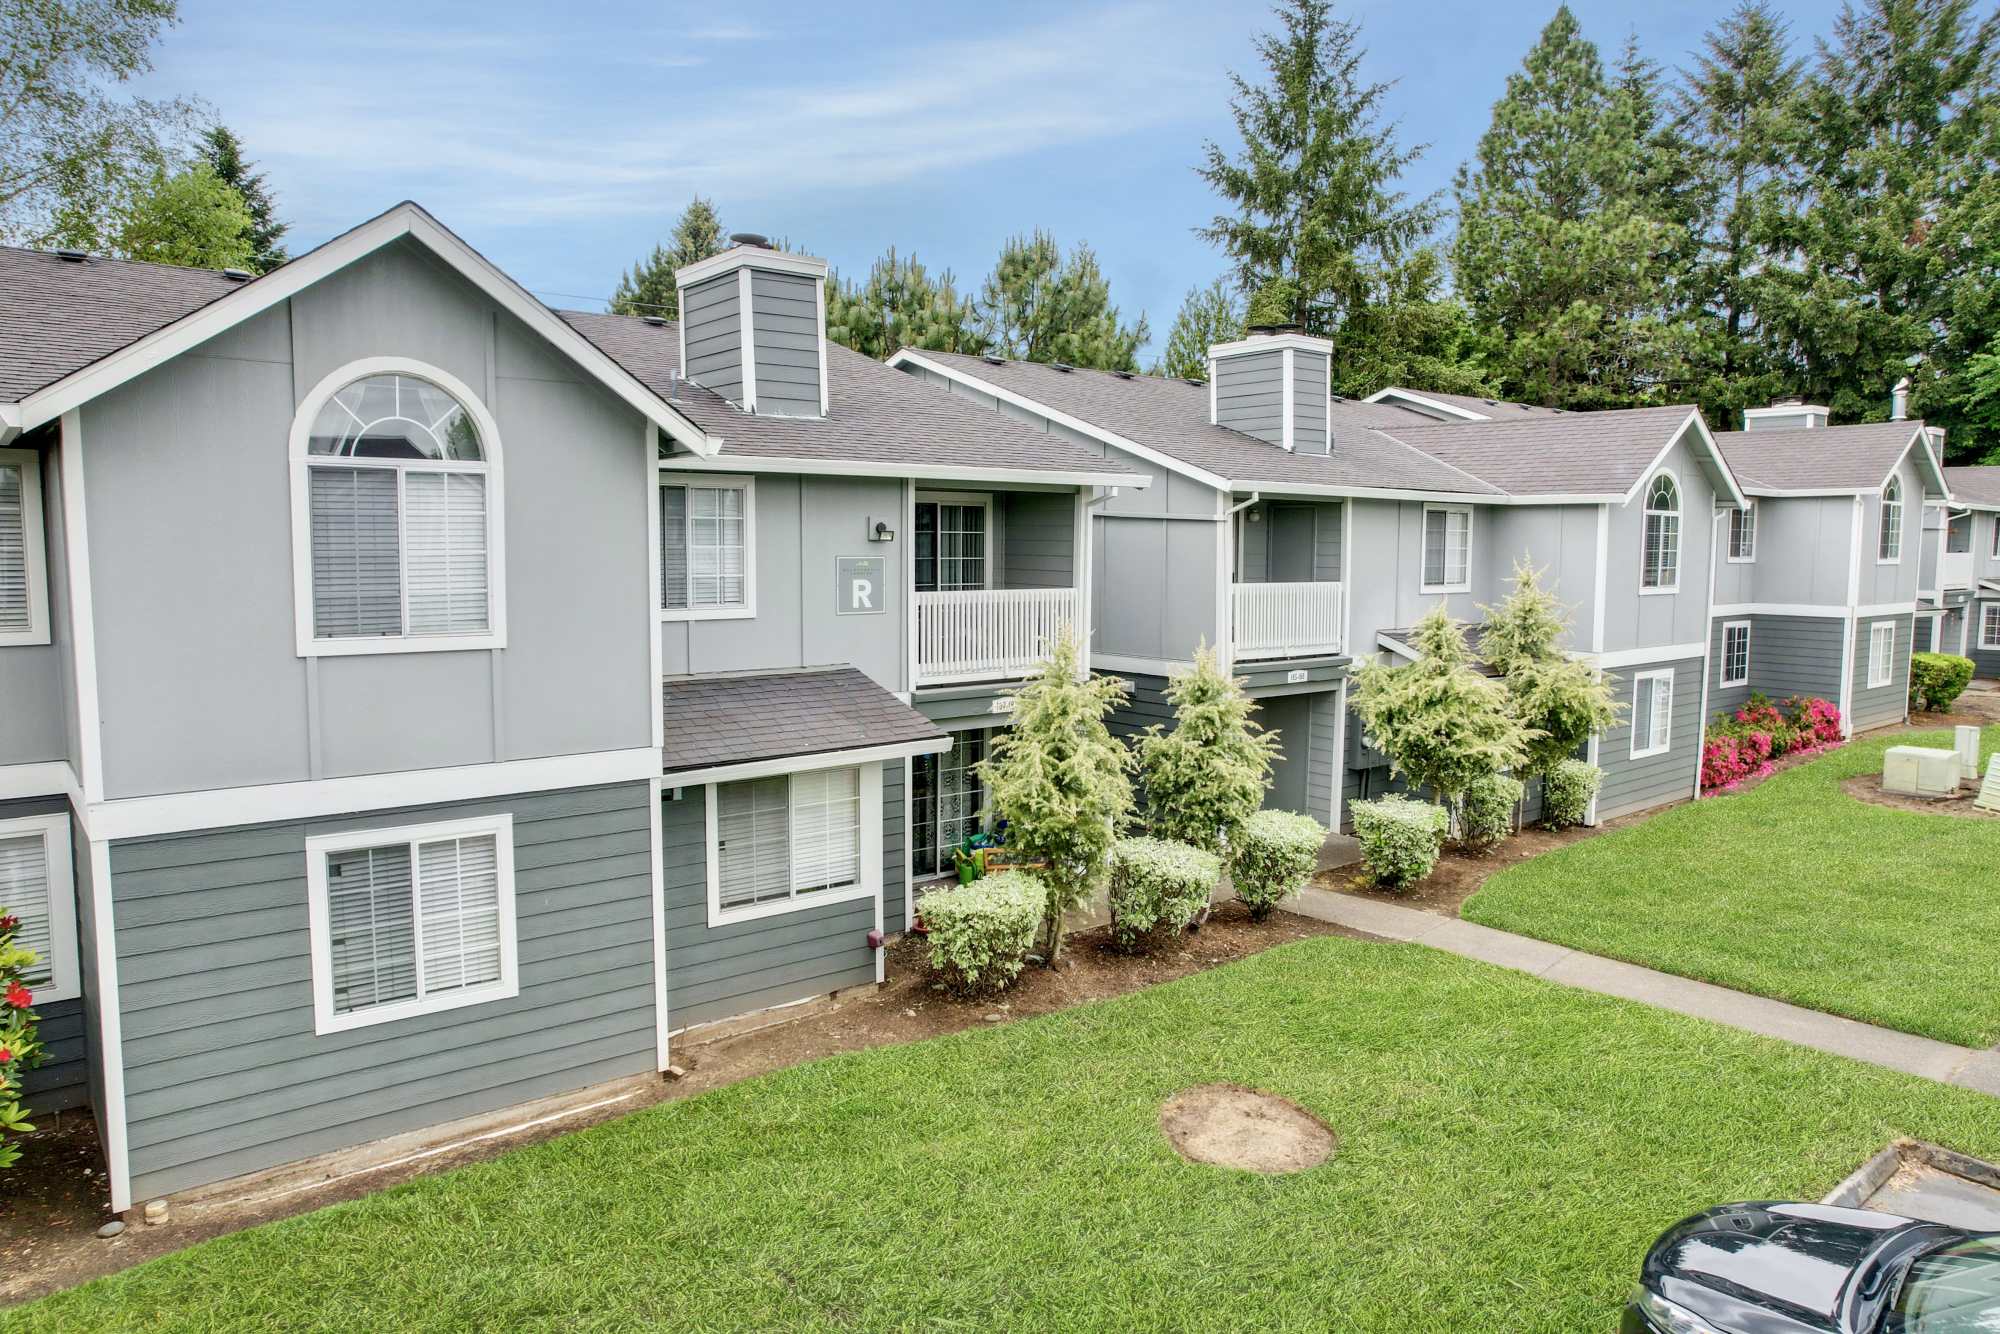 Building exterior view at Walnut Grove Landing Apartments in Vancouver, Washington